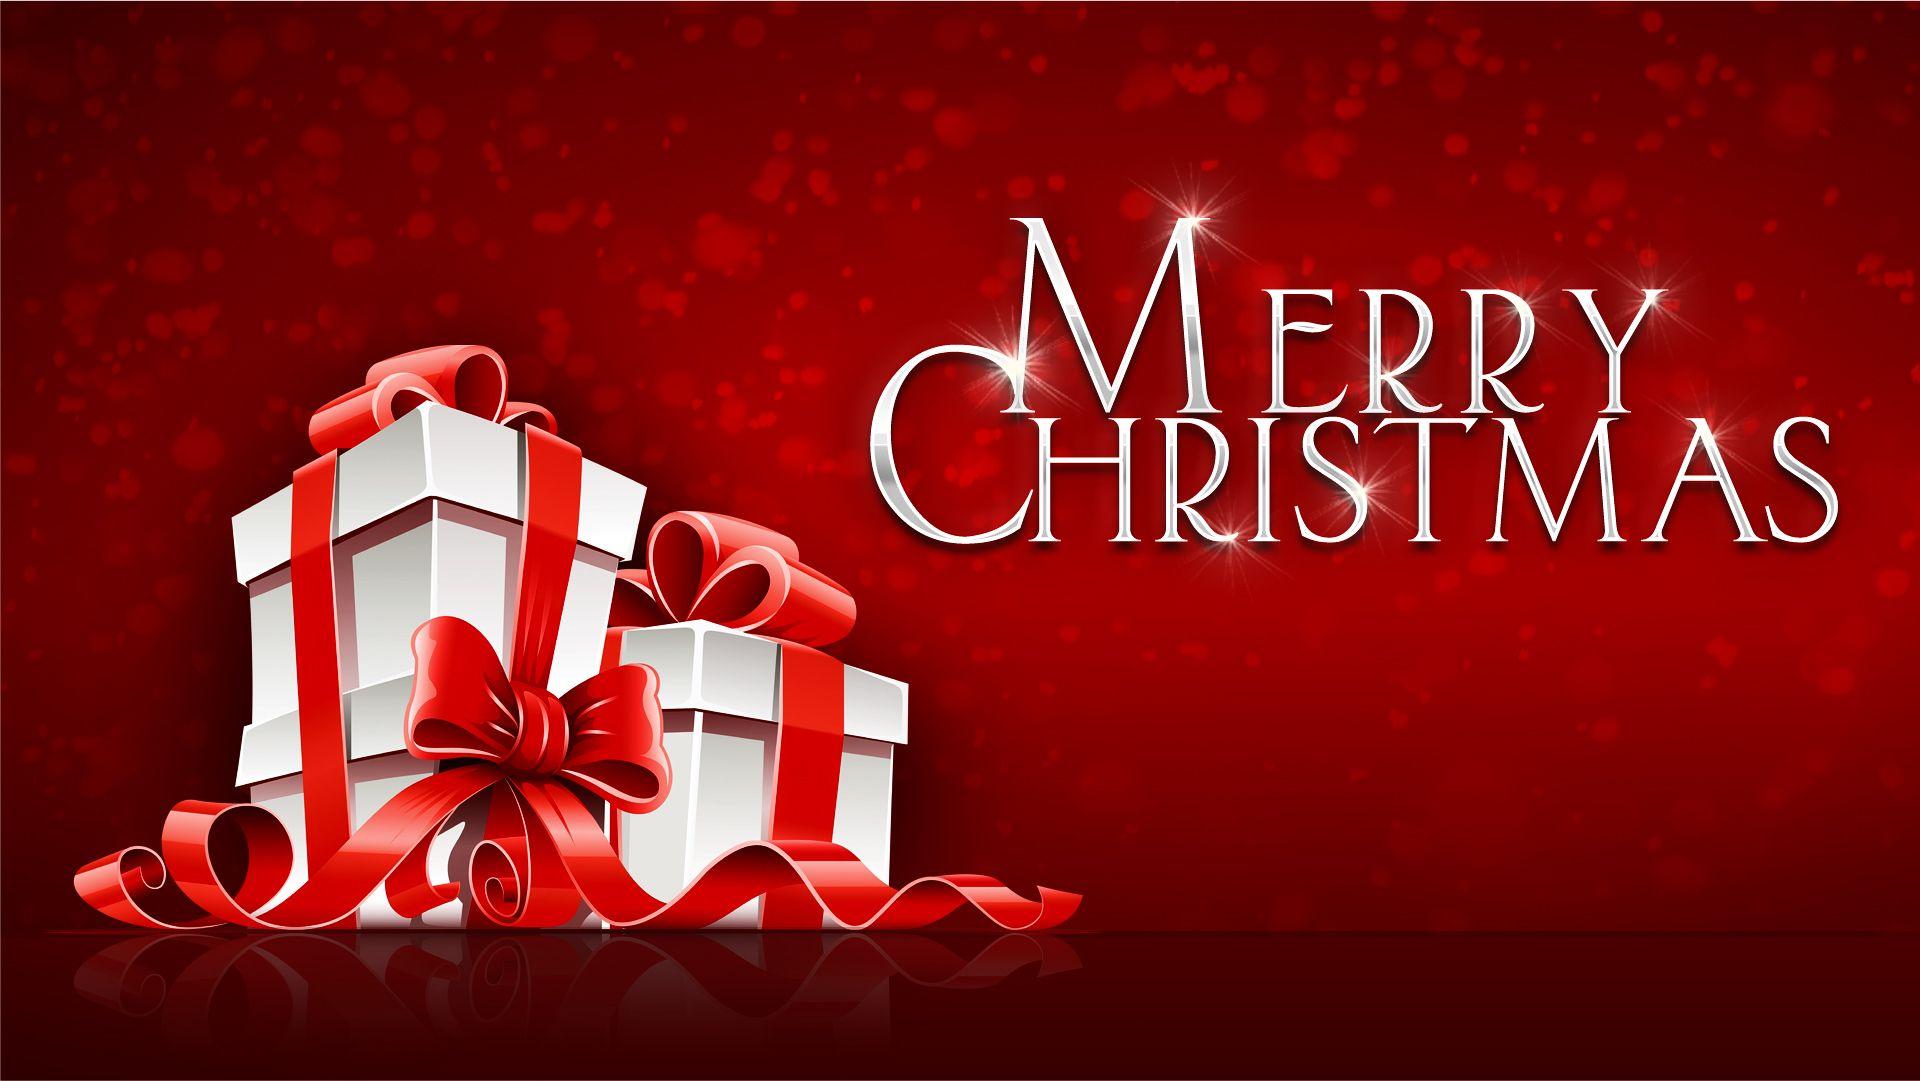 Merry Christmas XMAS 3D Wallpaper 2014 Year Wallpaper Quotes